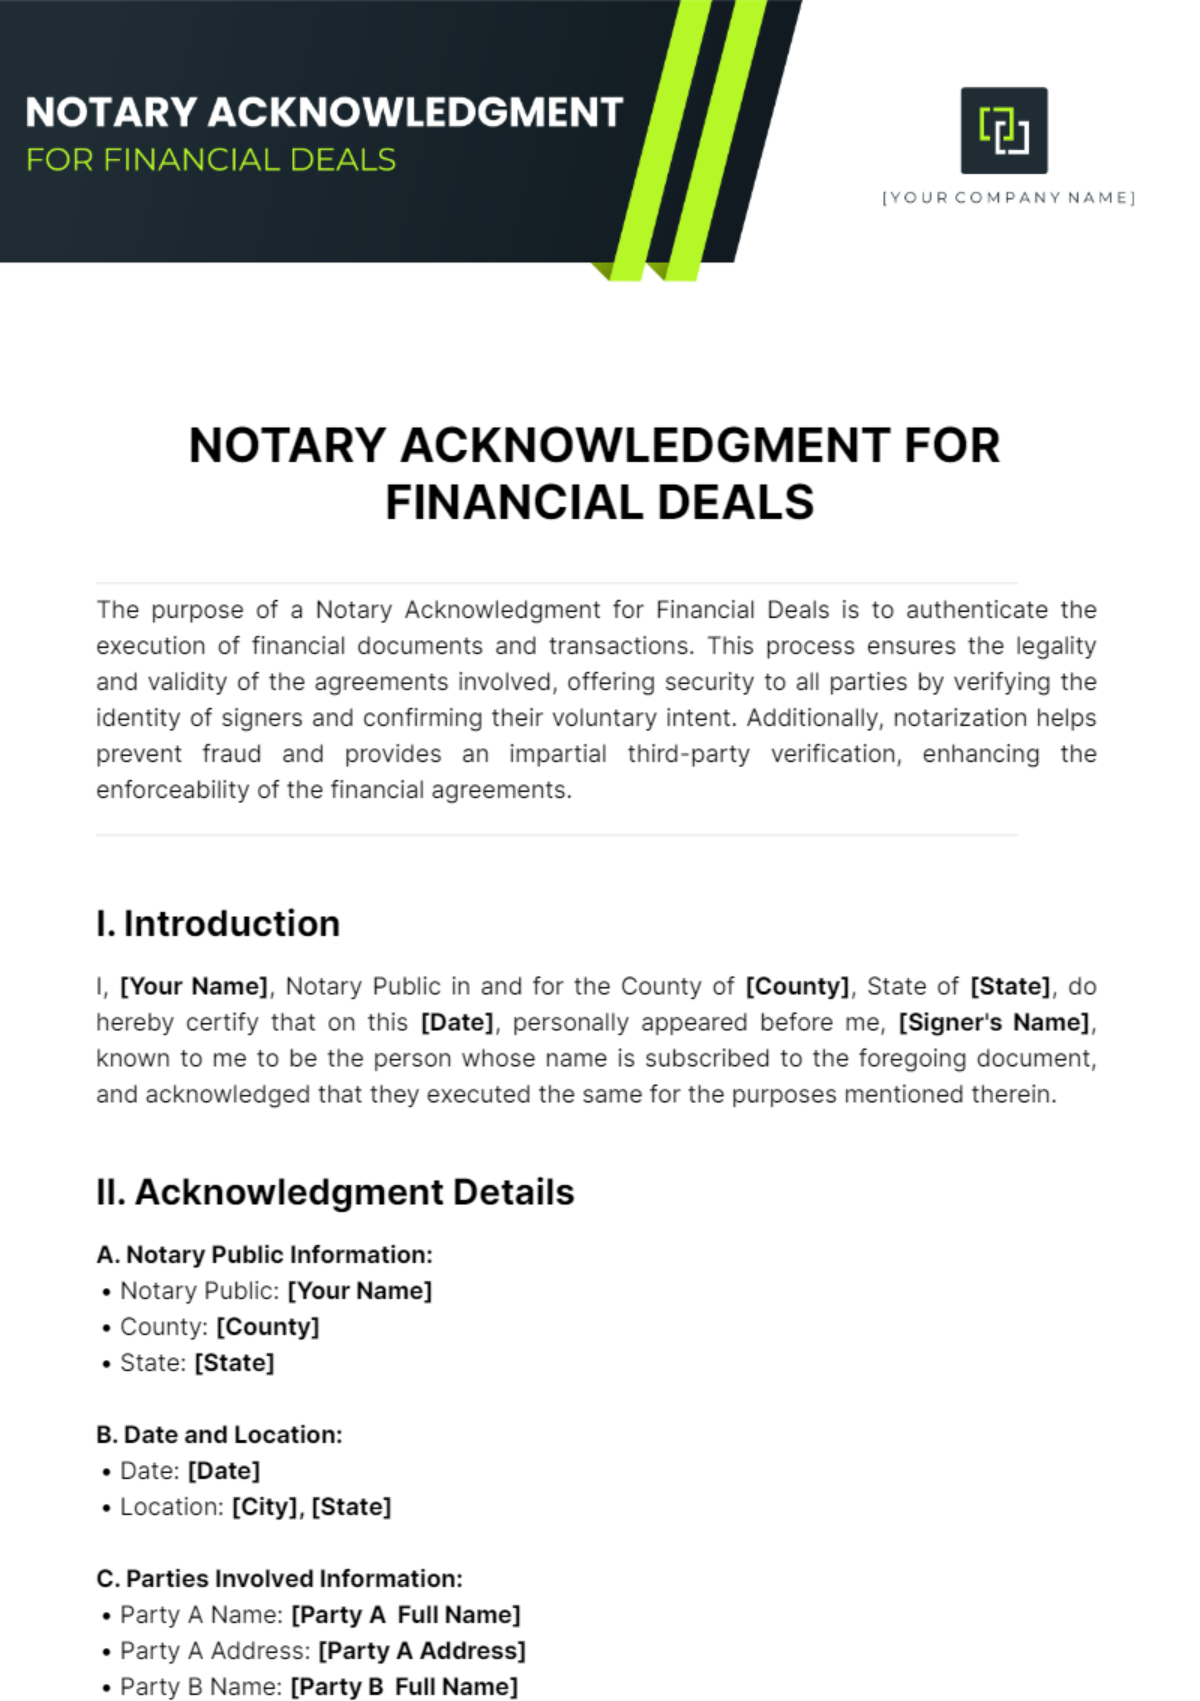 Free Notary Acknowledgment For Financial Deals Template